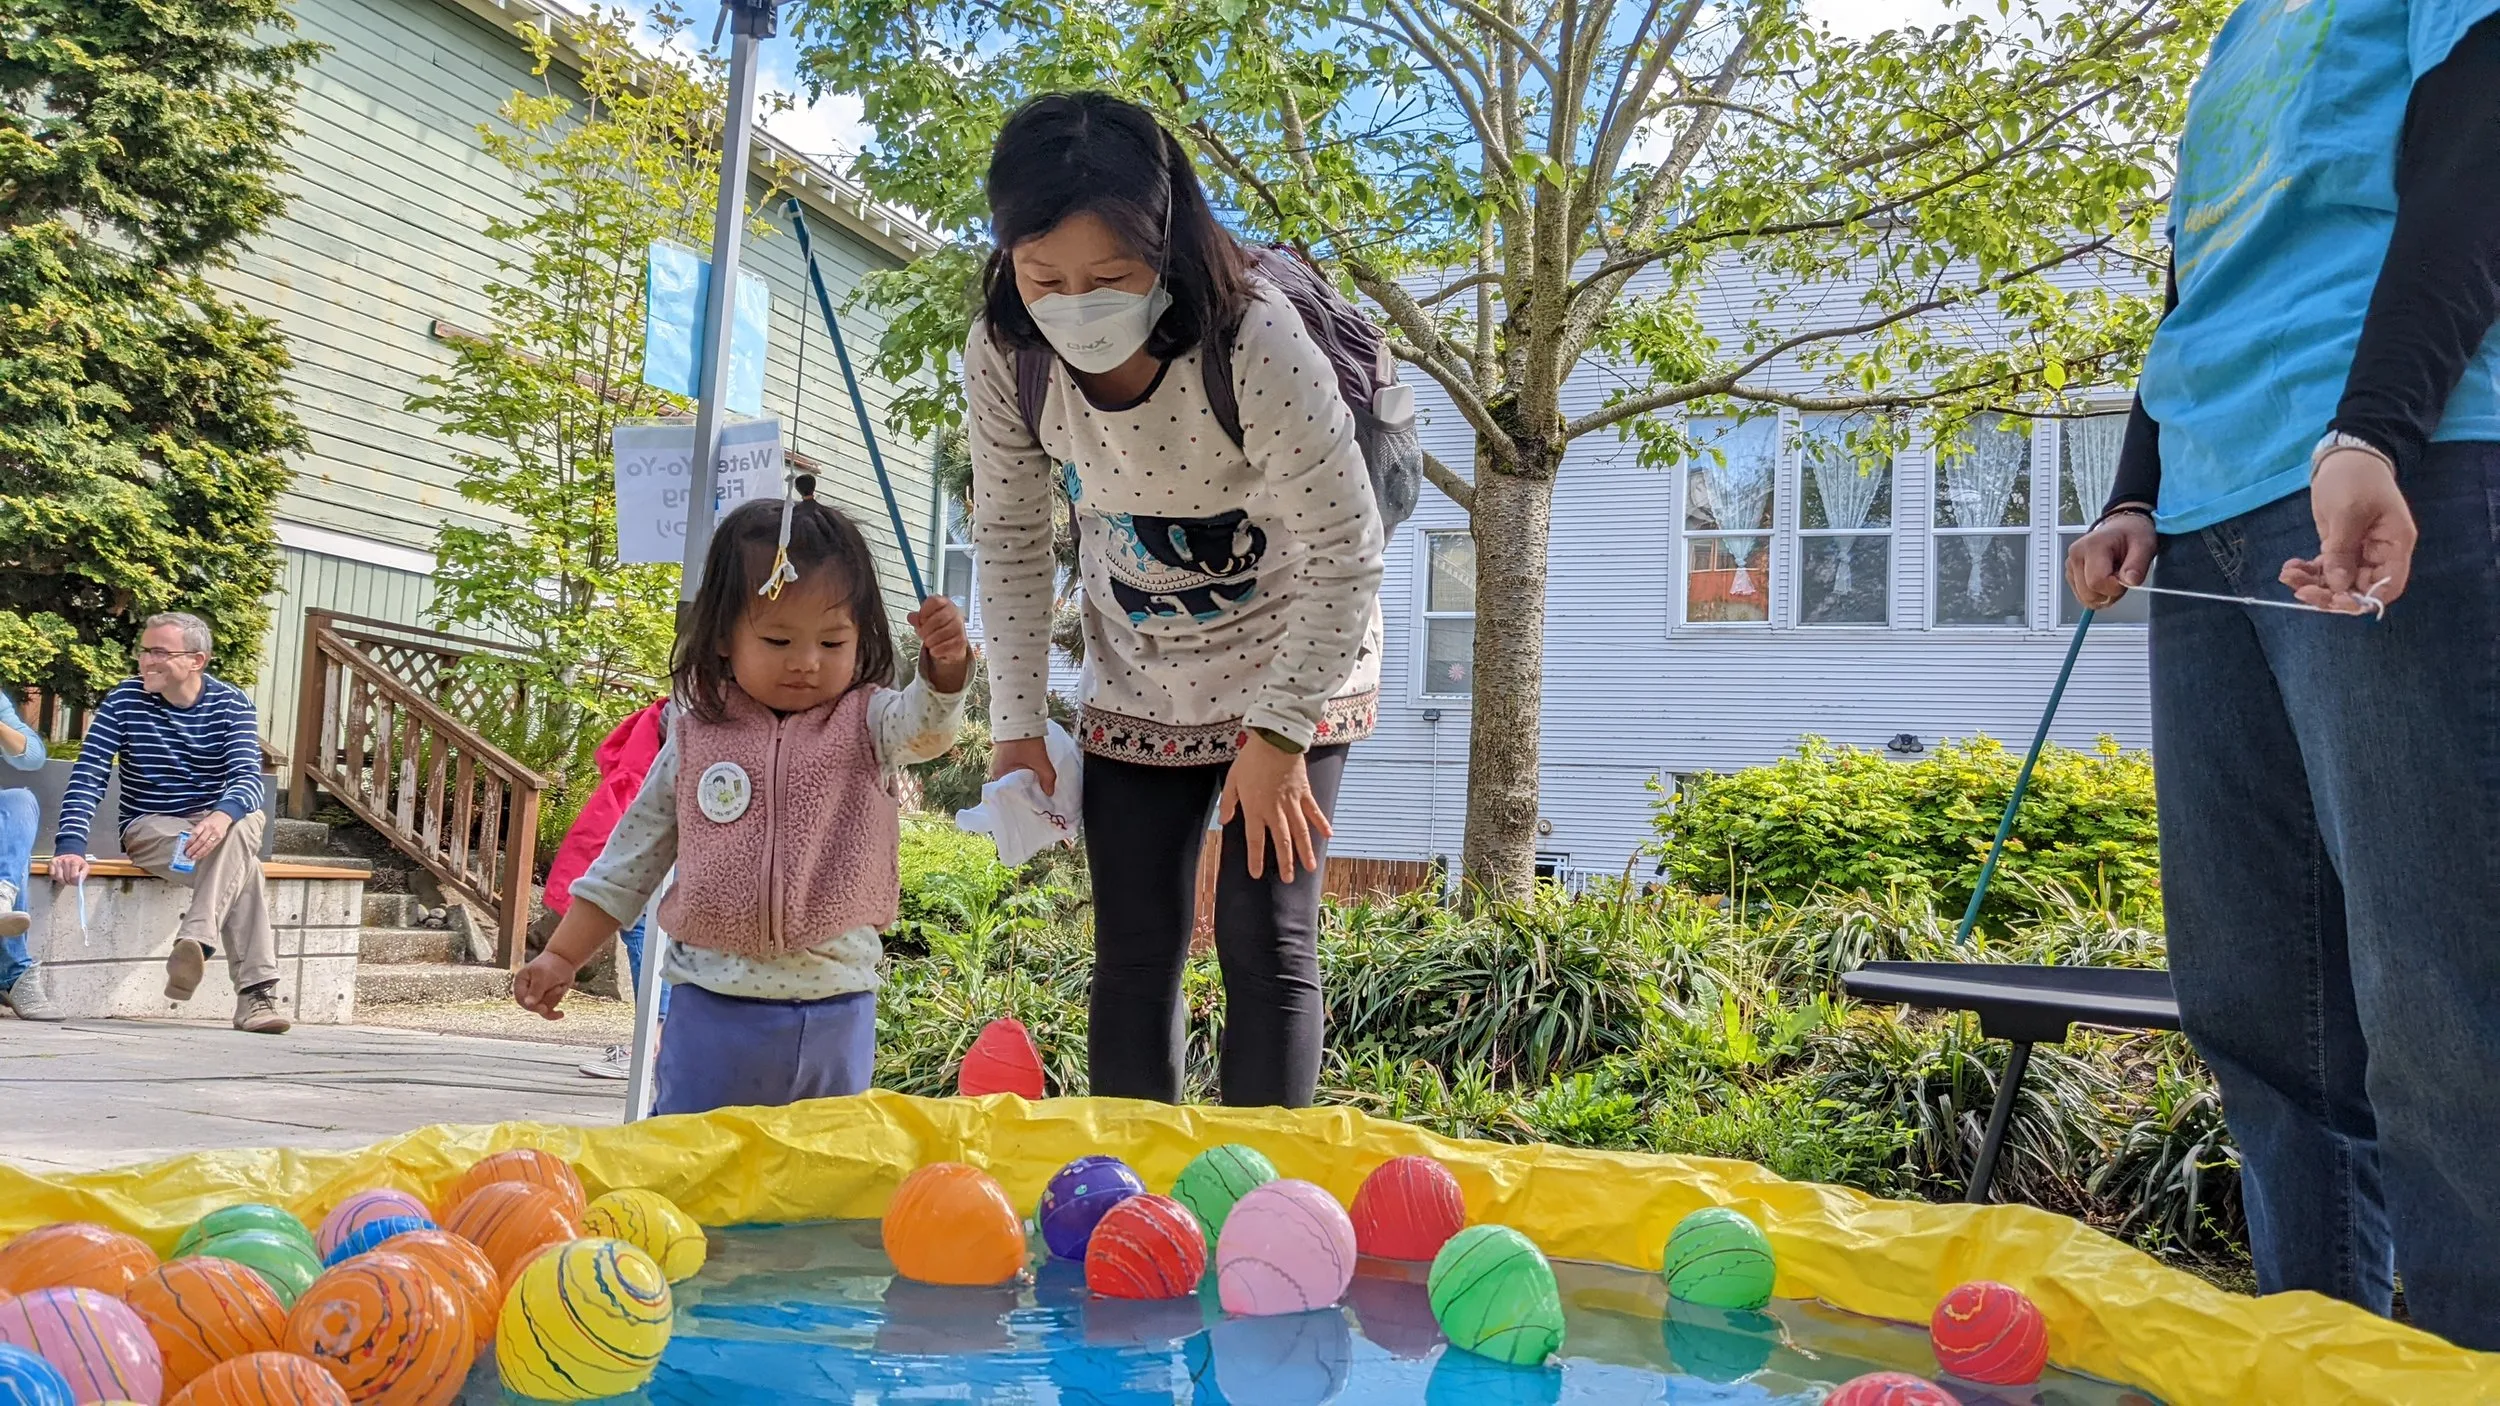 A mother and child stand in front of a kiddie pool filled with water and floating mini balloons.